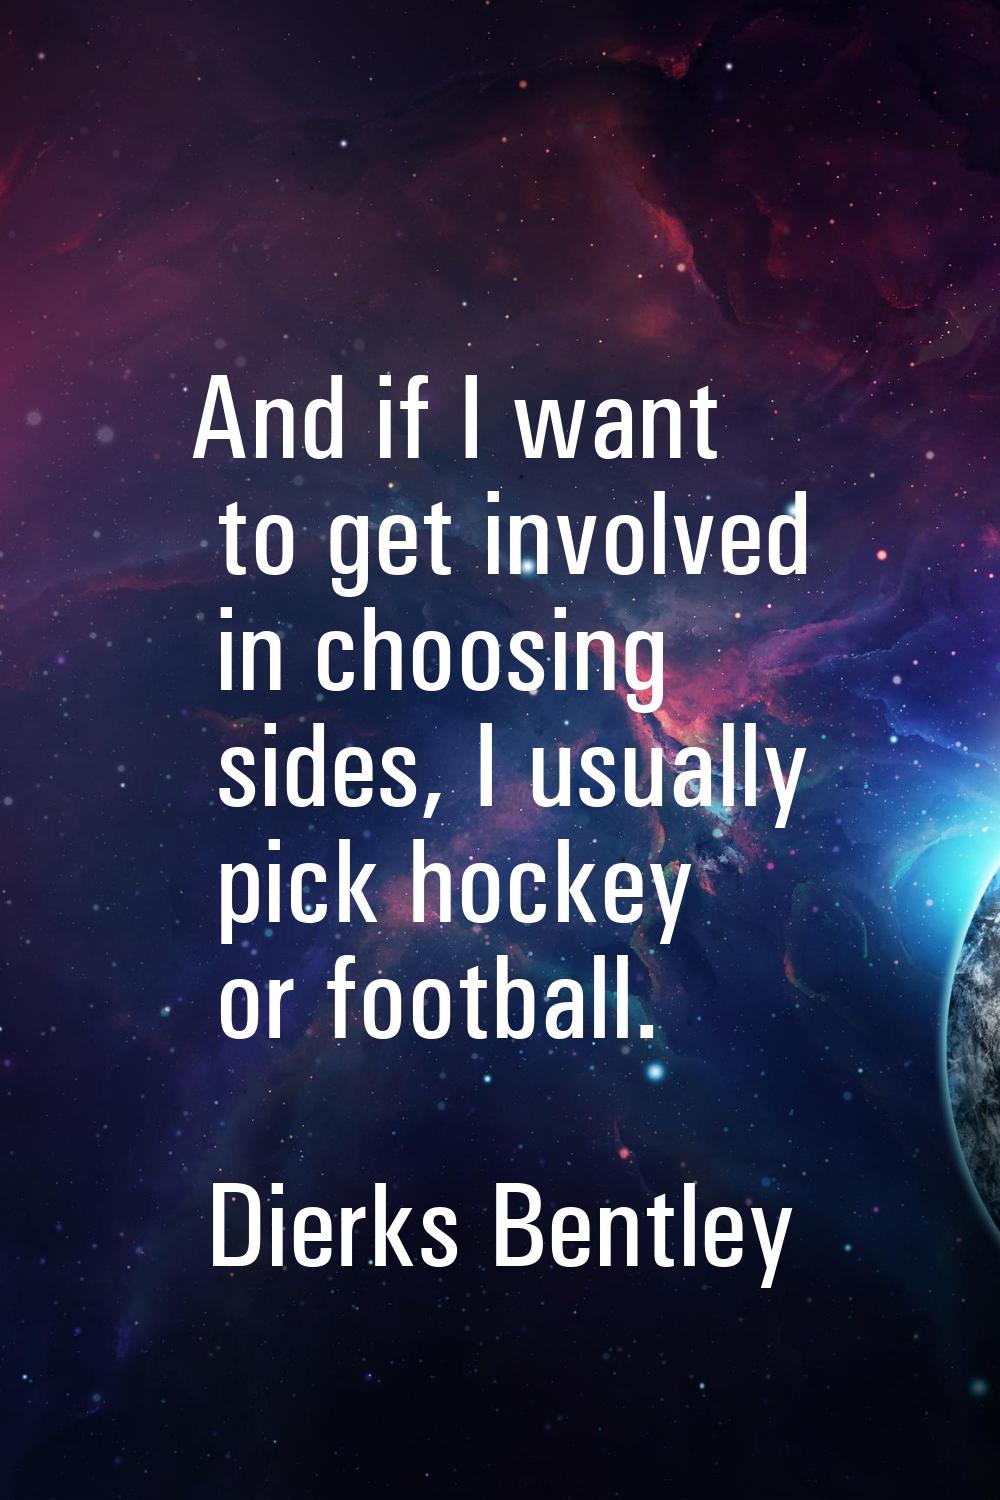 And if I want to get involved in choosing sides, I usually pick hockey or football.